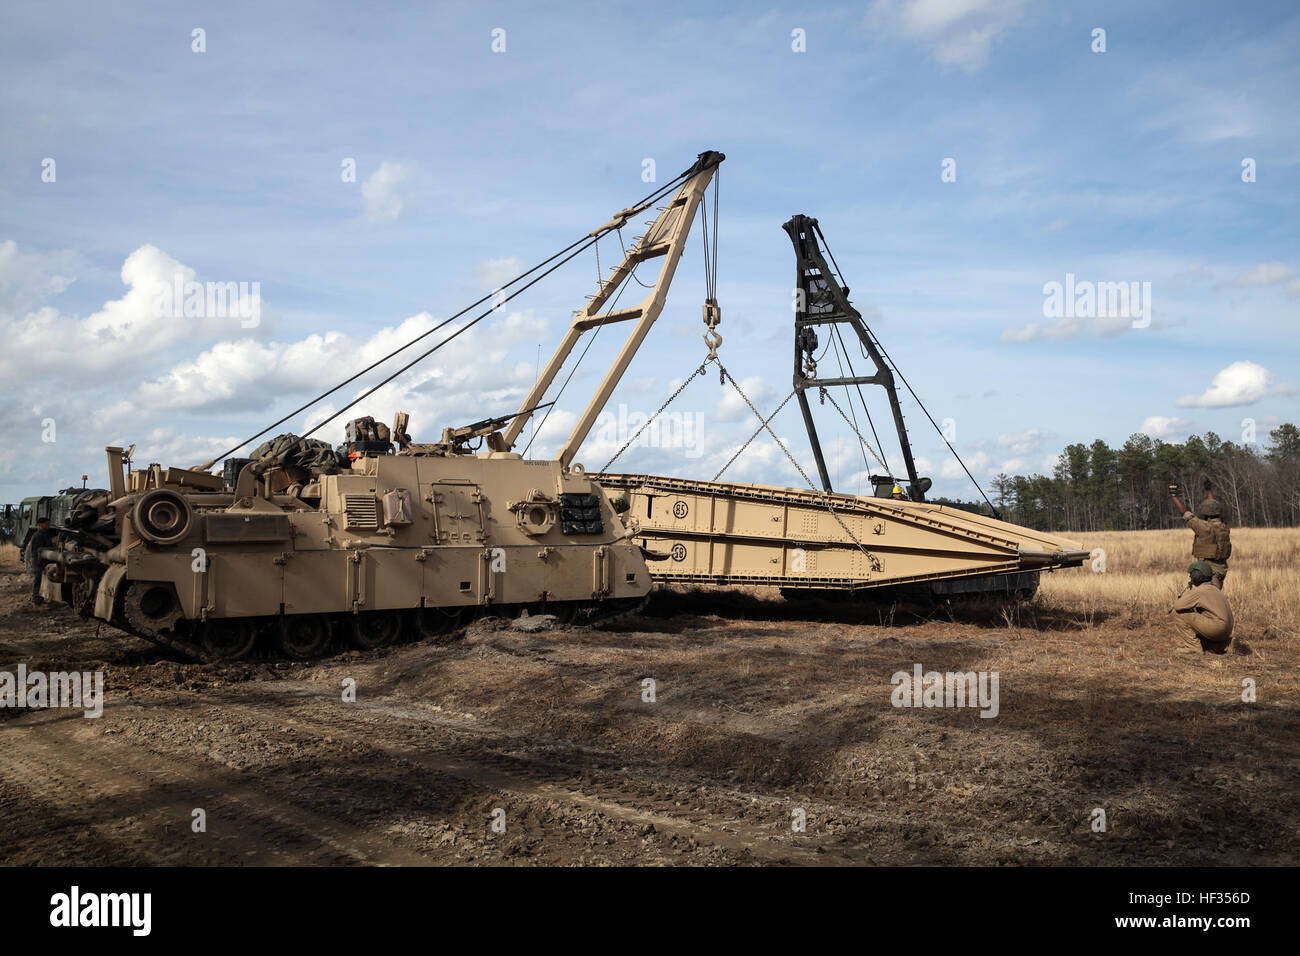 Two M88A2 Heavy Equipment Recovery Combat Utility Lifting Extraction Systems (HERCULES) with 2nd Tank Battalion, 2nd Marine Division lift an M60A1 Armored Vehicle Launched Bridge (AVLB) onto a flatbed for transportation during a Marine Corps Combat Readiness Evaluation at Fort Pickett, Va., March 25-28, 2015. Marines with the battalion were evaluated in different scenarios during the MCCRE, which included tactical road marches, tanks advancing through a field while engaging potential threats, and shooting at a range designed for platoon gunnery qualification.  (U.S. Marine Corps photo taken by Stock Photo